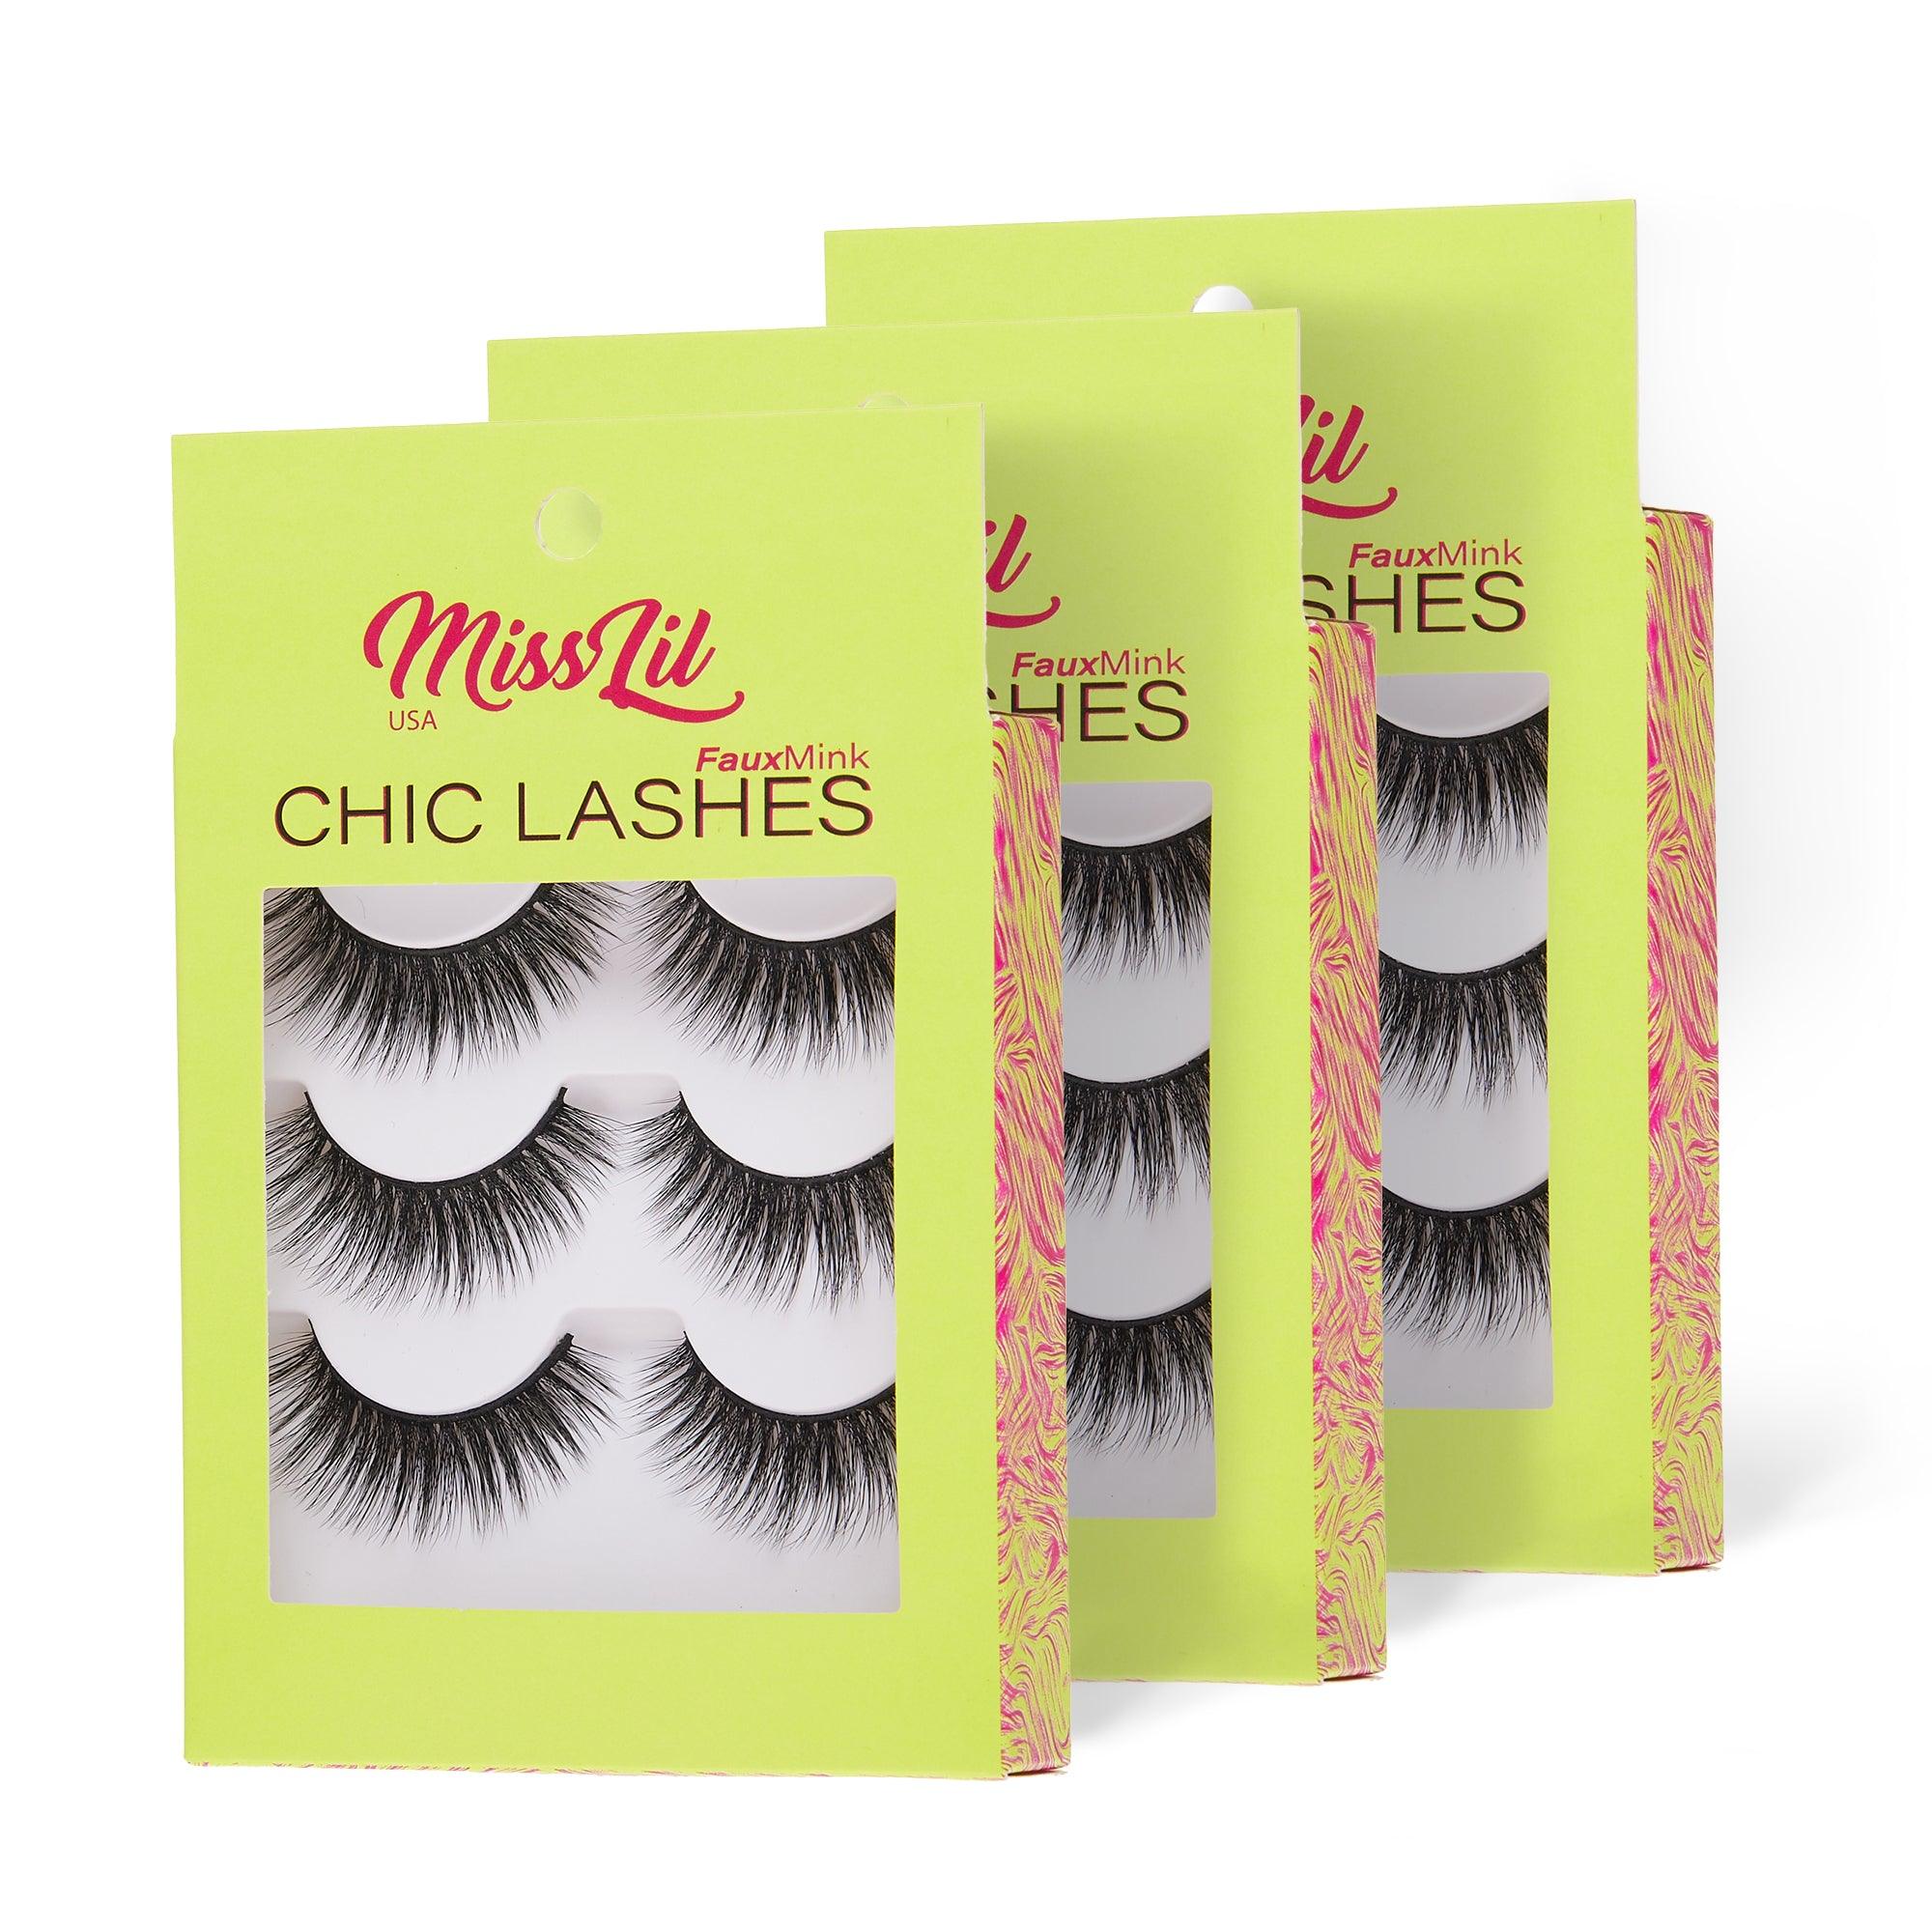 3-Pairs Lashes-Chic Lashes Collection #38 (Pack of 12) - Miss Lil USA Wholesale